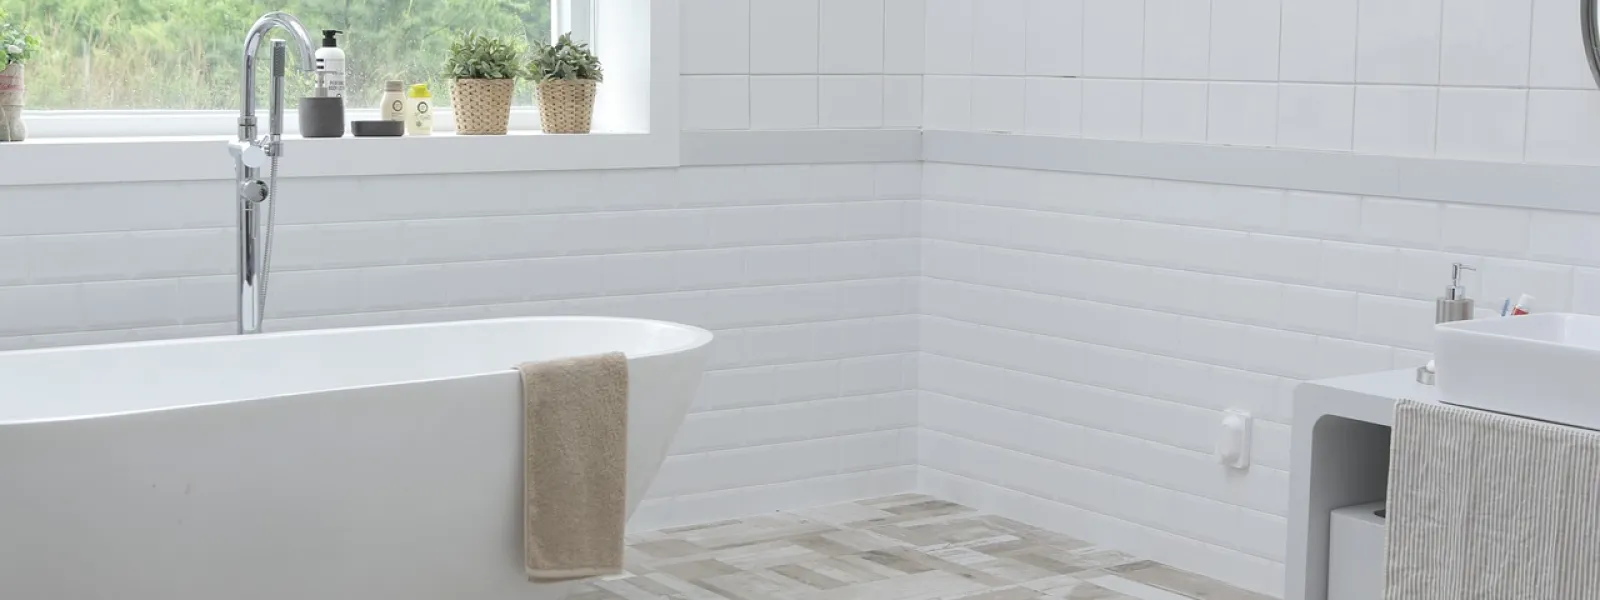 How To Get the Most Out of Your Bathroom Space